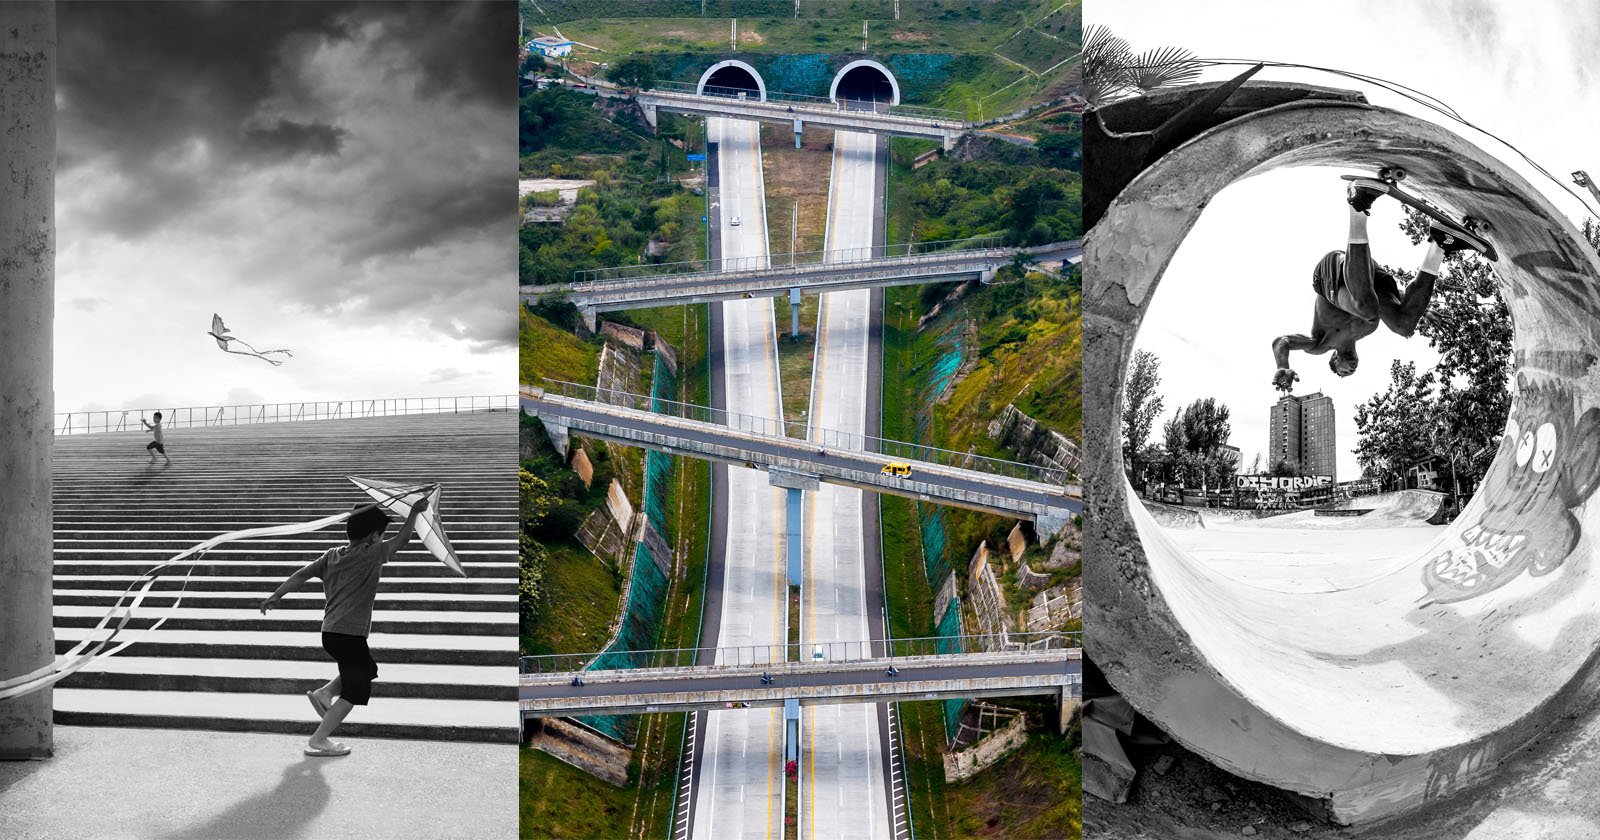 Photography Competition Celebrates the Beauty of Concrete